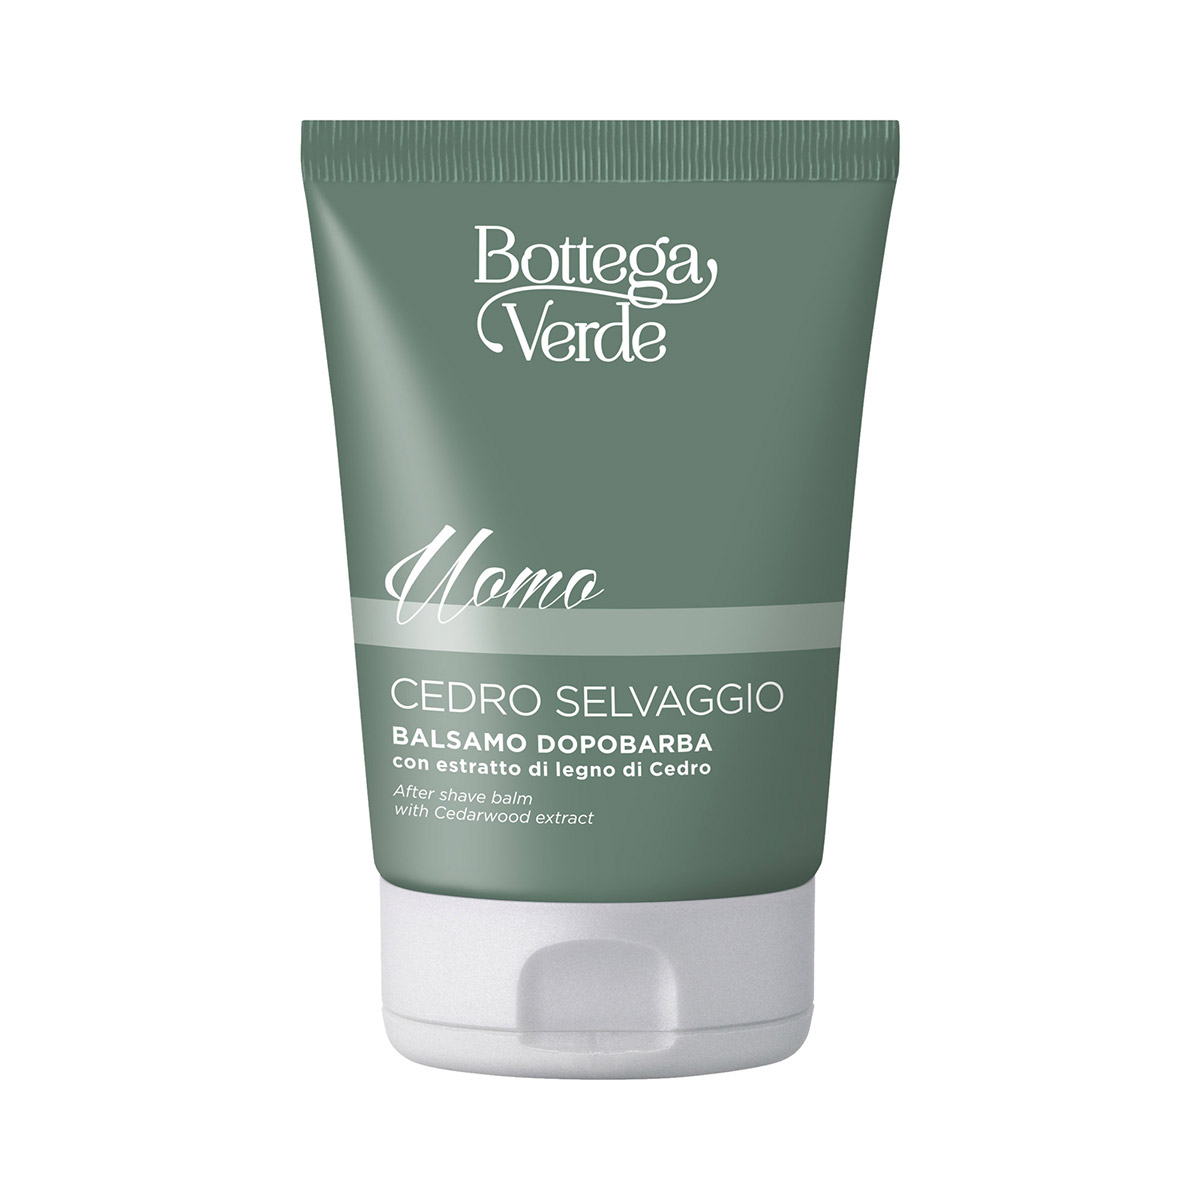 UOMO - Cedro selvaggio - Aftershave balm with Cedarwood extract (75 ml)